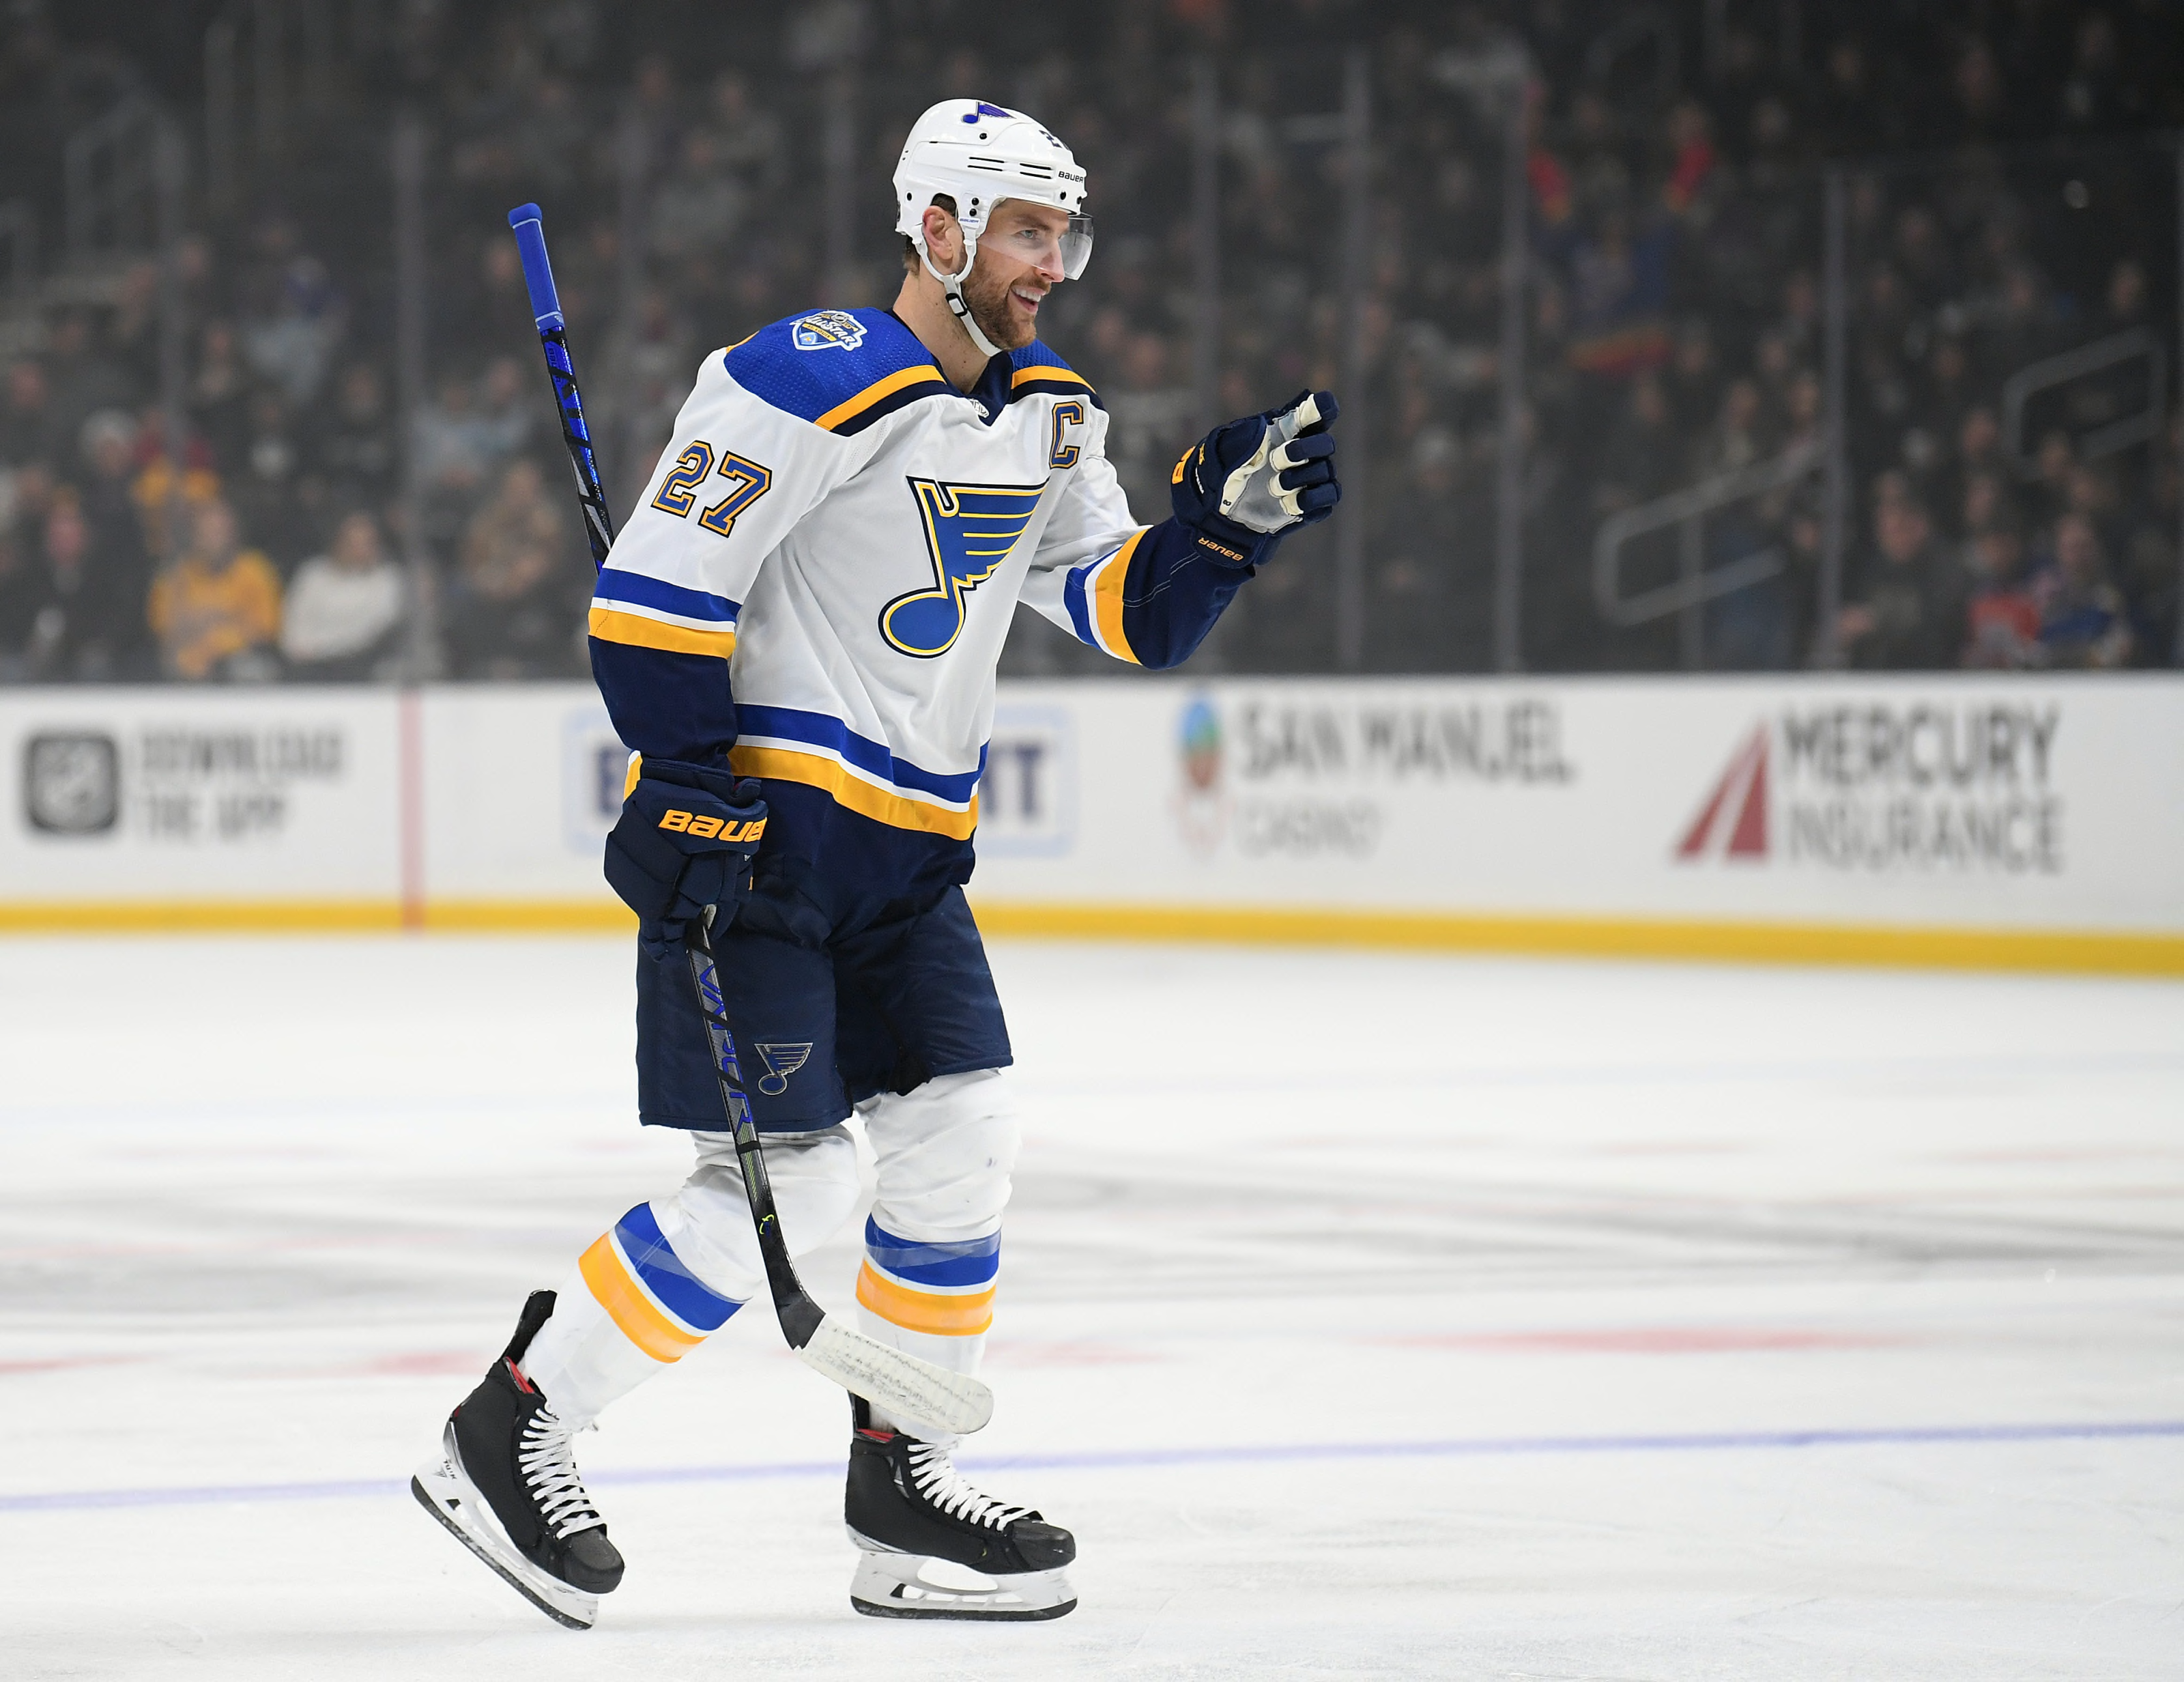 VGK's Alex Pietrangelo gives new meaning to sacrifice, on and off the ice